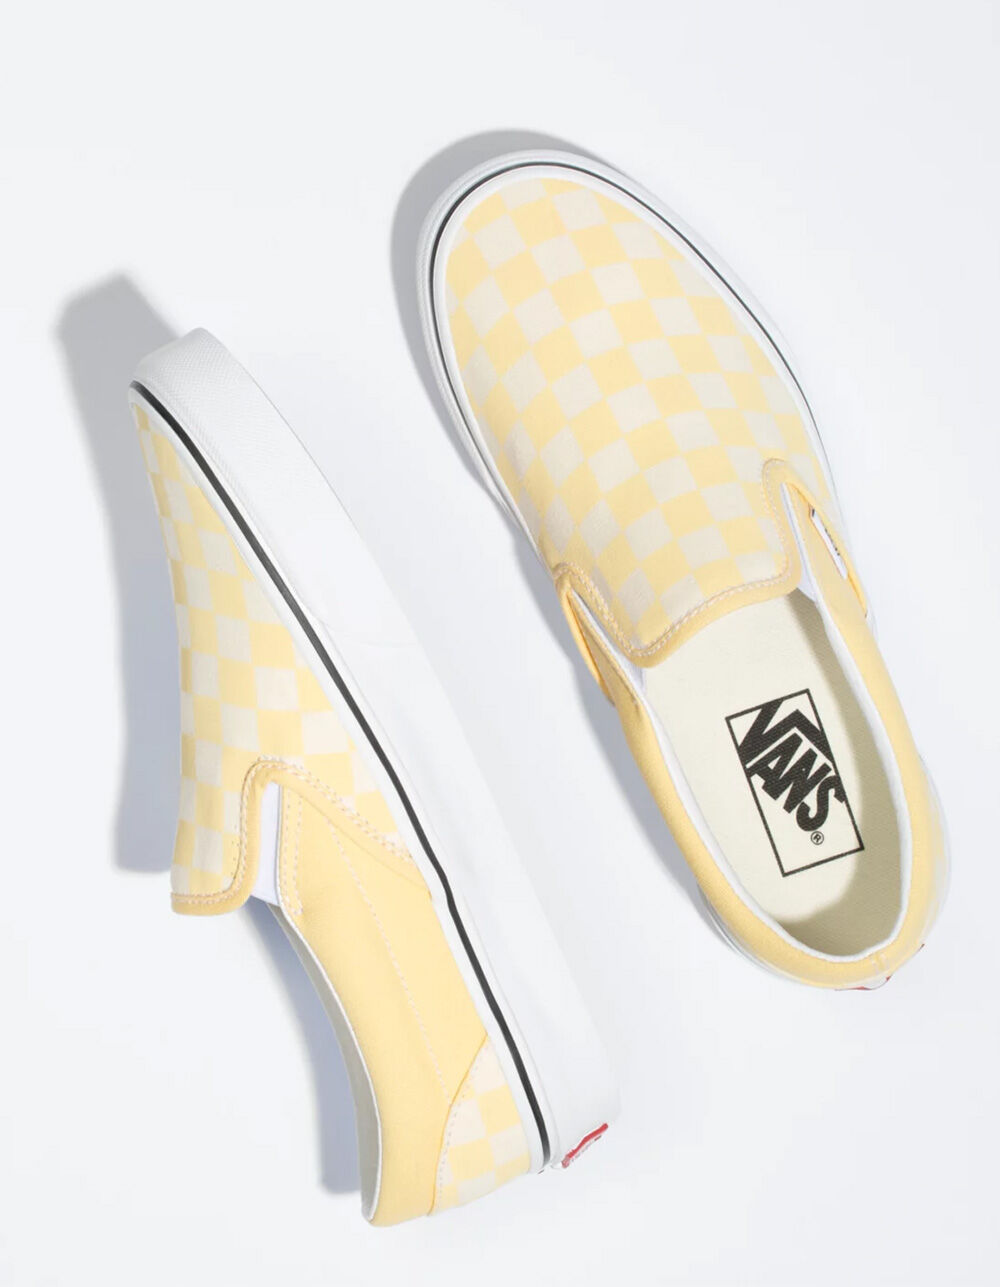 Vans Classic Slip-On Cottage Check Floral Yellow White Size 10 Women's NWOB  